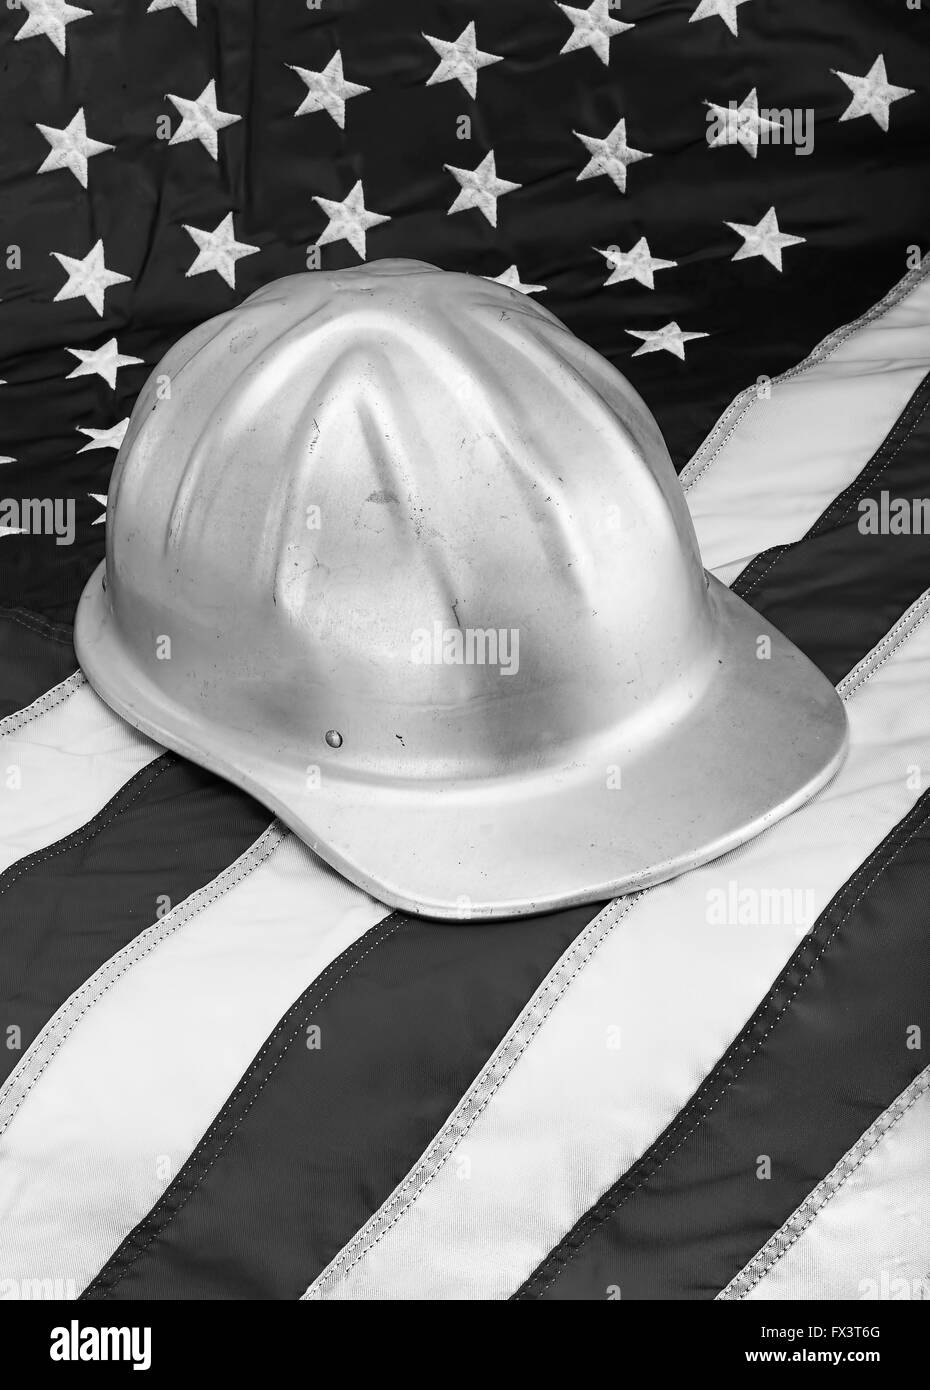 Hard hat on American flag in black and white. Stock Photo